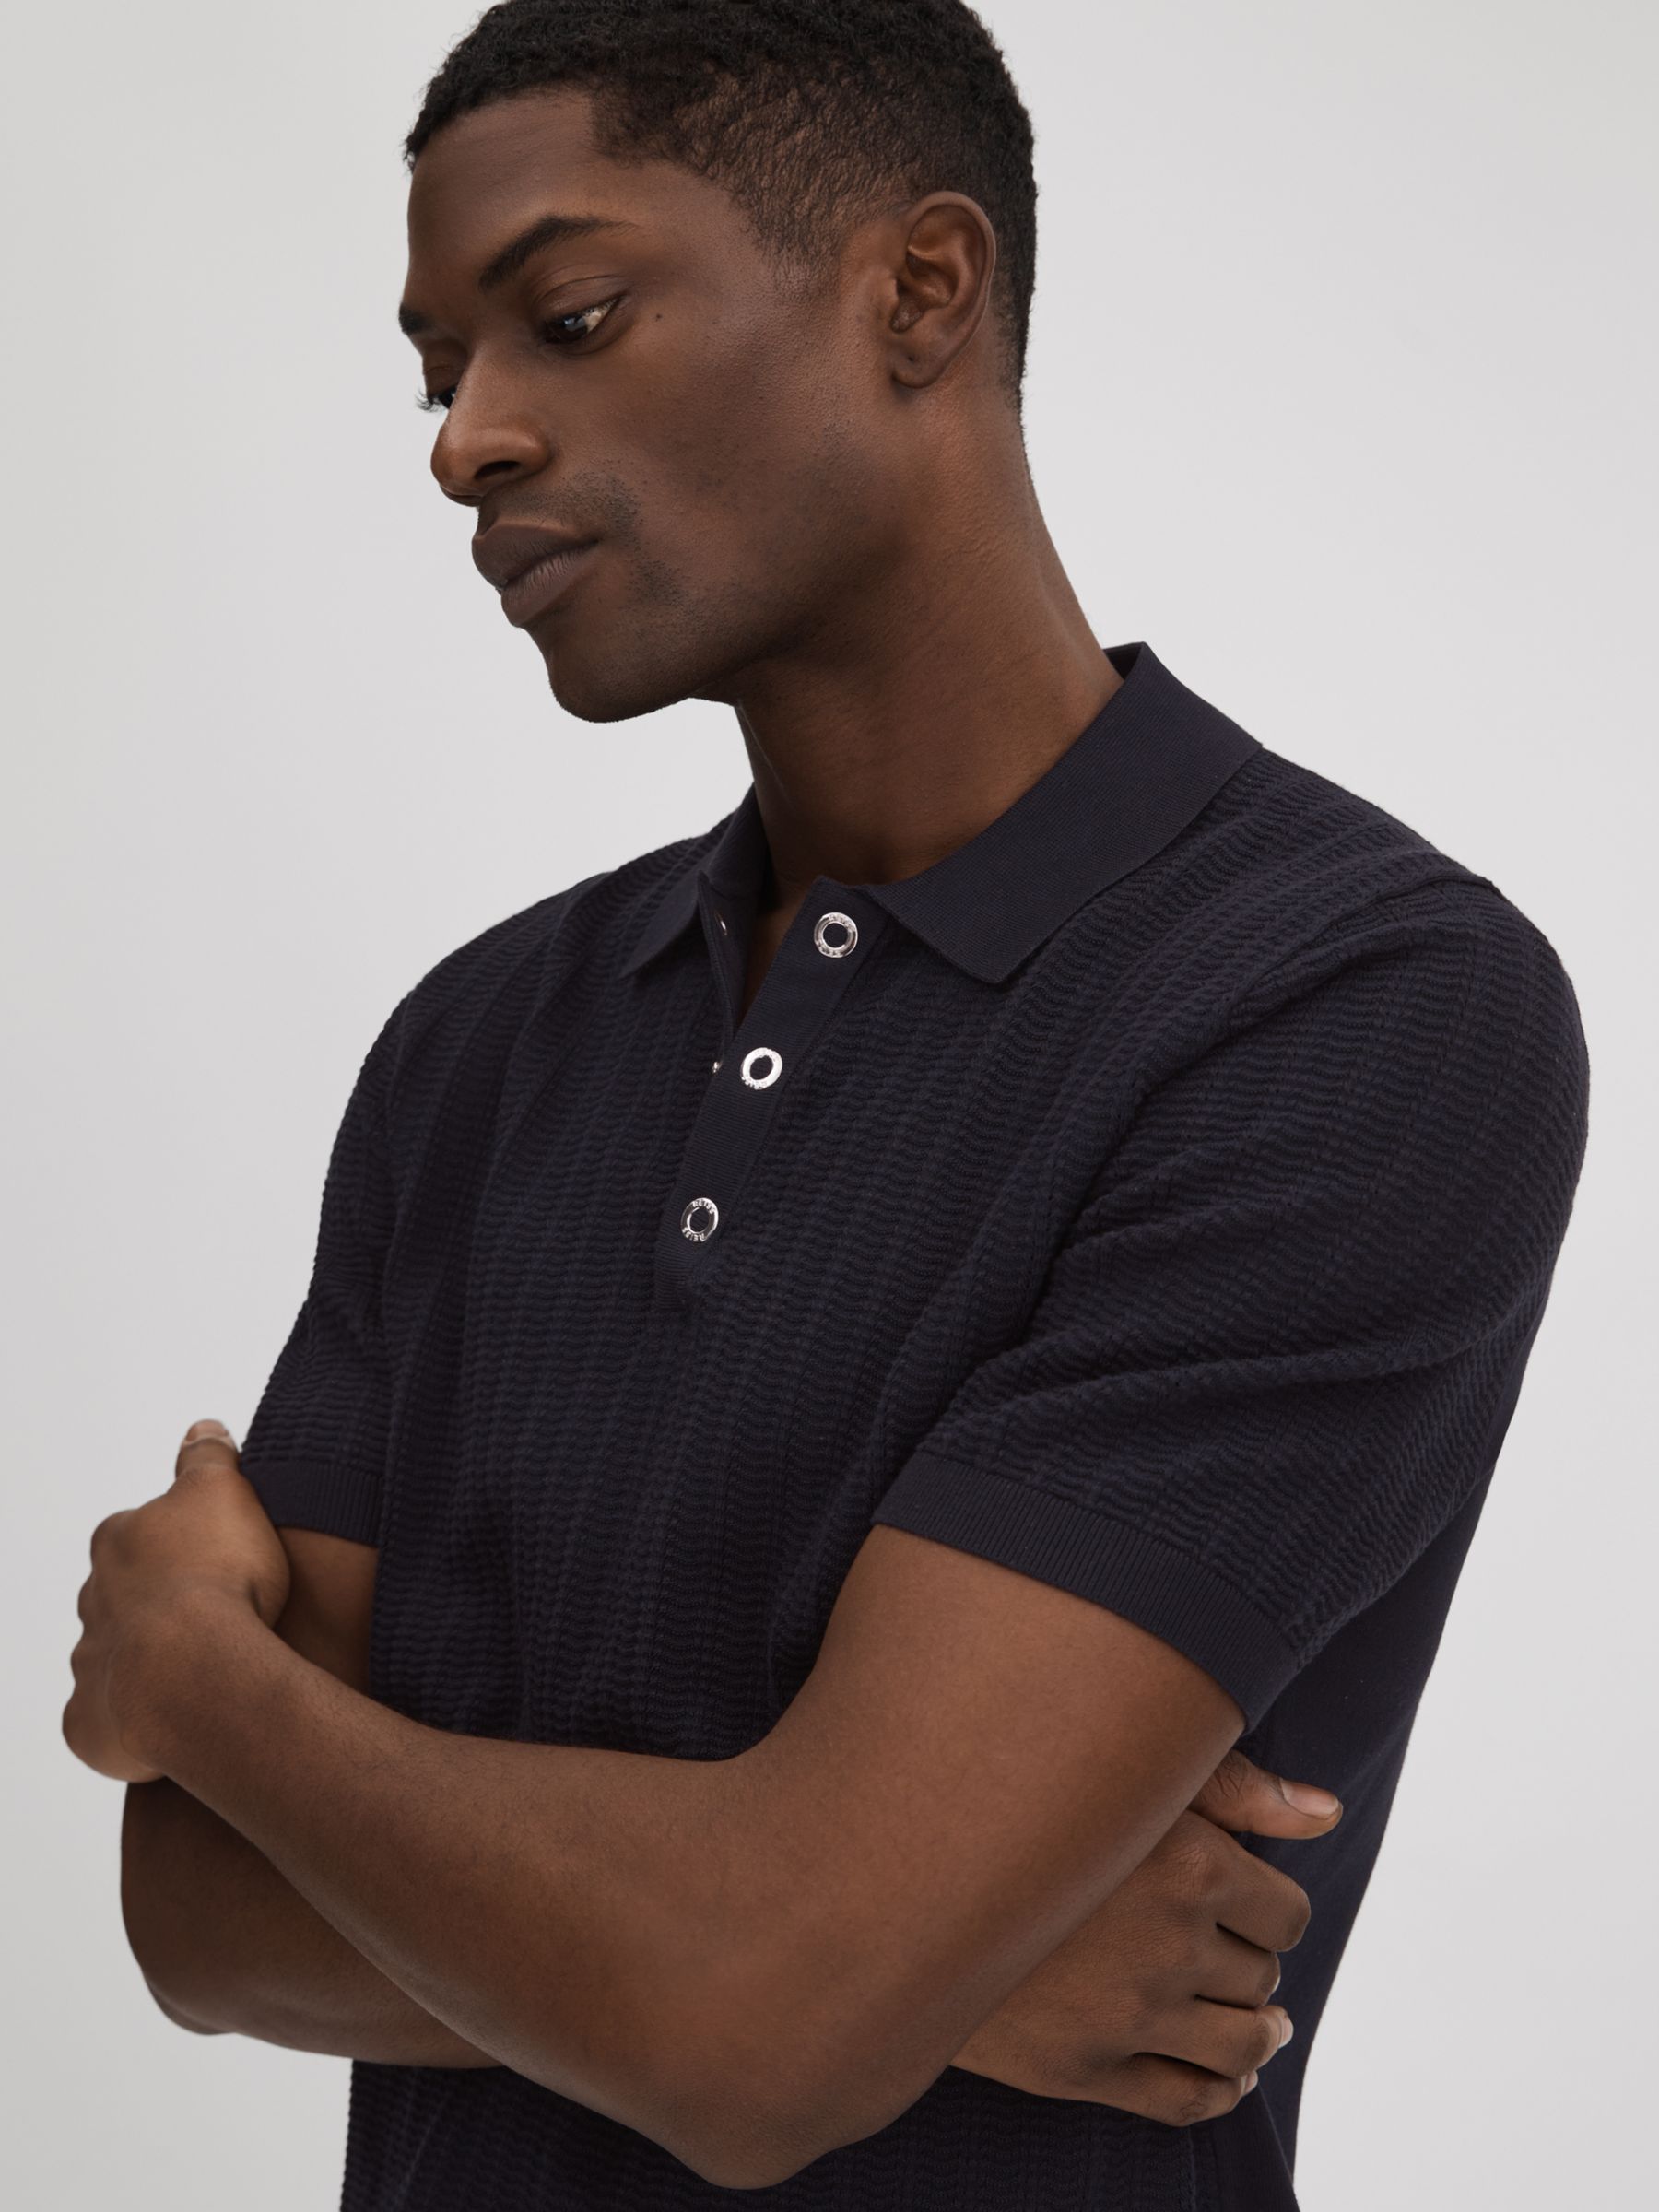 Reiss Pascoe Short Sleeve Polo Top, Navy at John Lewis & Partners